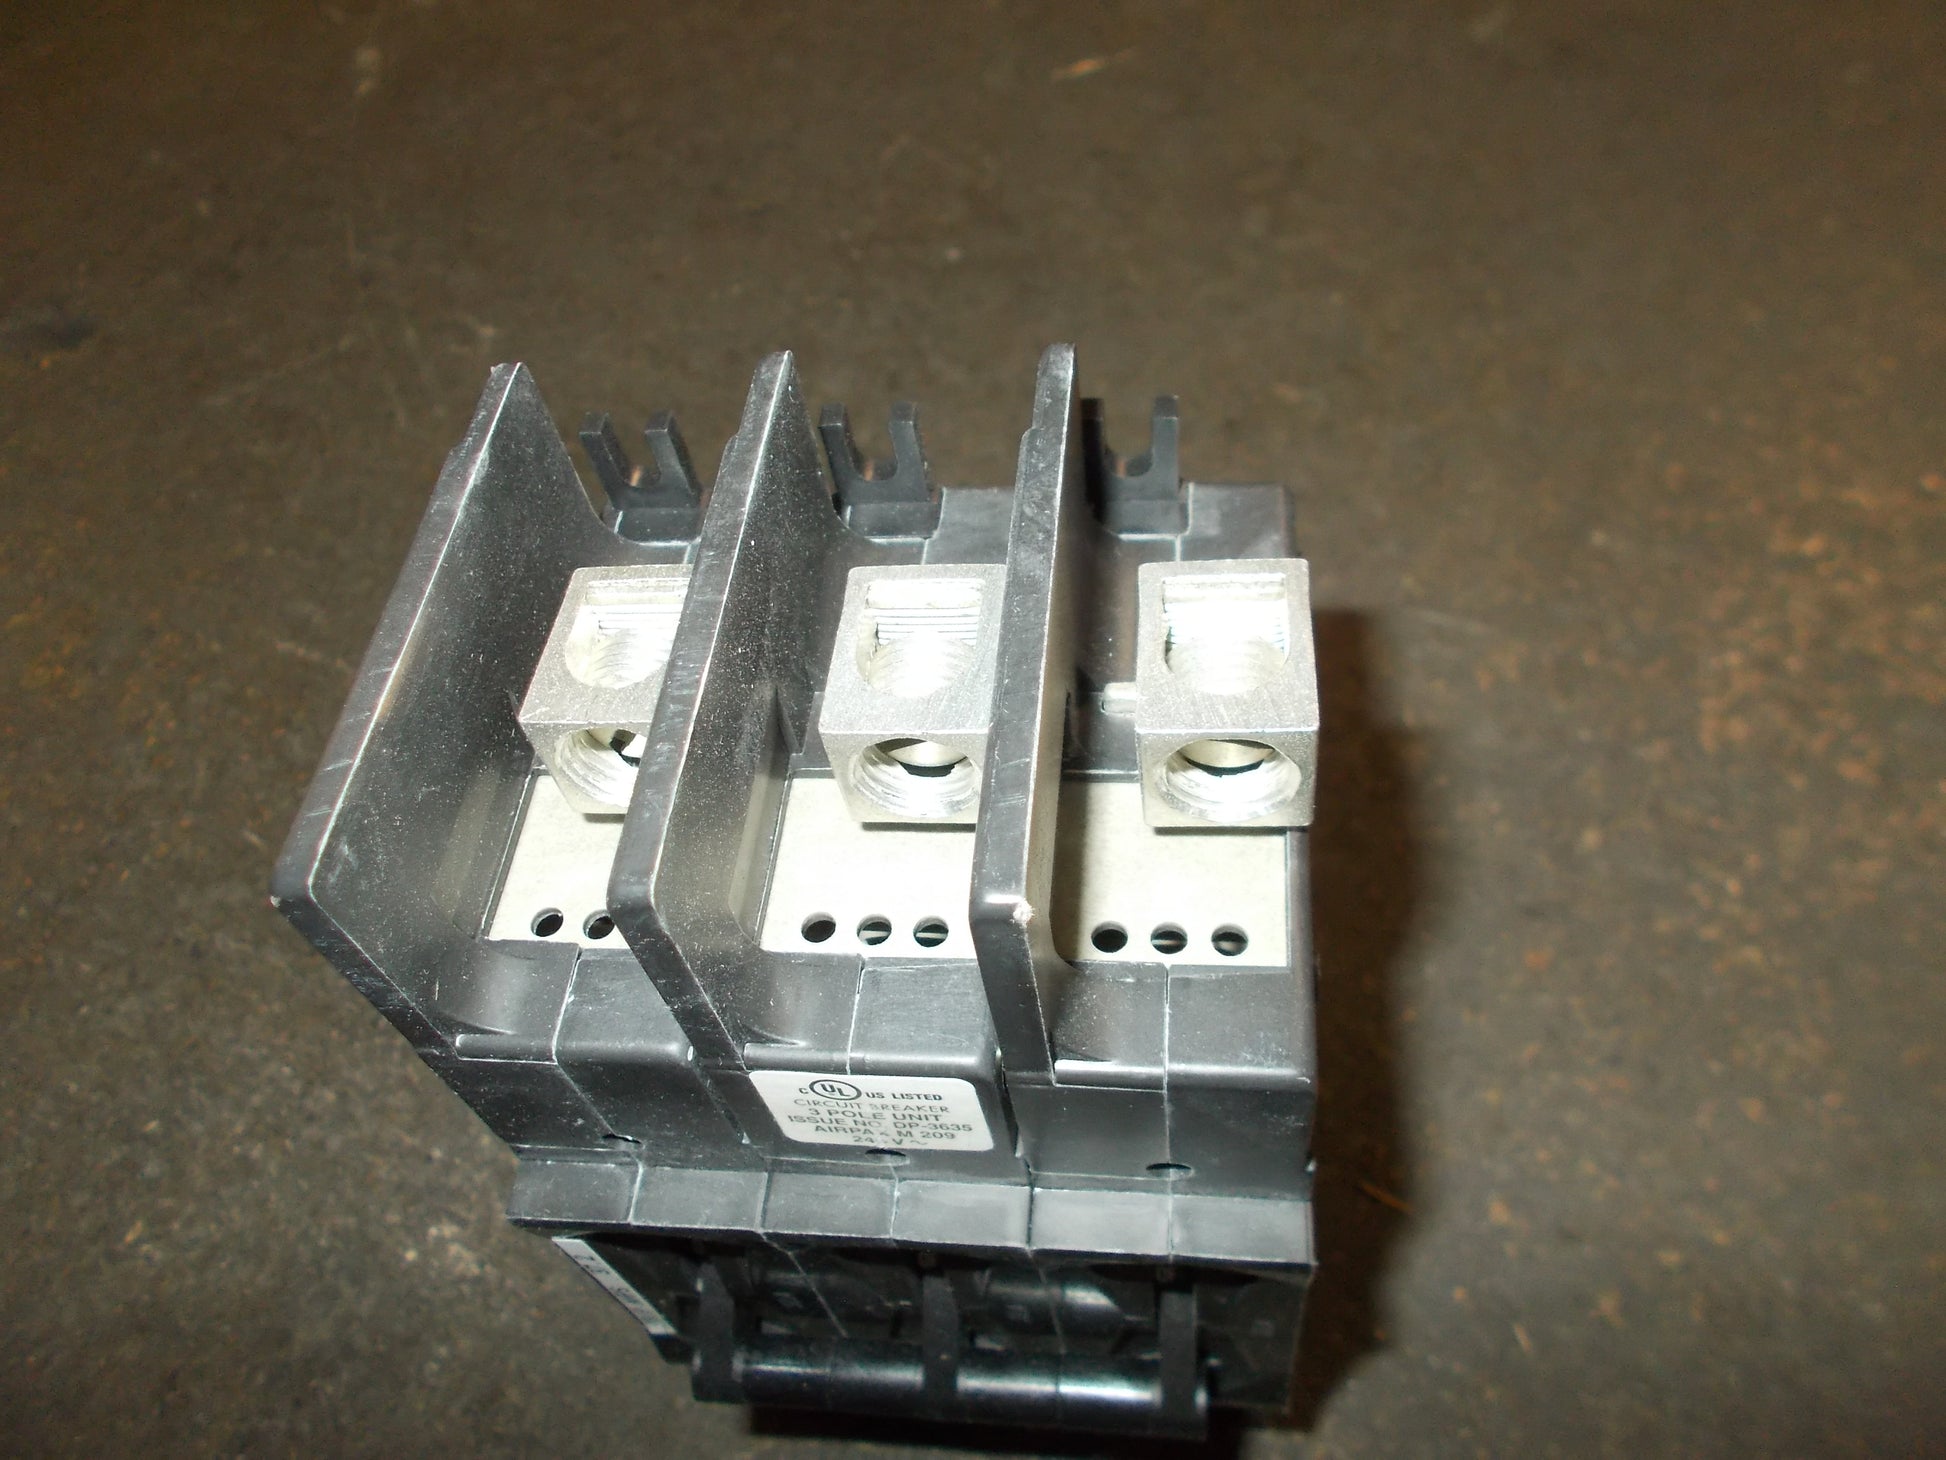 3 POLE 32.4 AMP "209 MULTI-POLE" SERIES HYDRAULIC MAGNETIC CIRCUIT BREAKER PROTECTOR 240/50-60/1 OR 3 